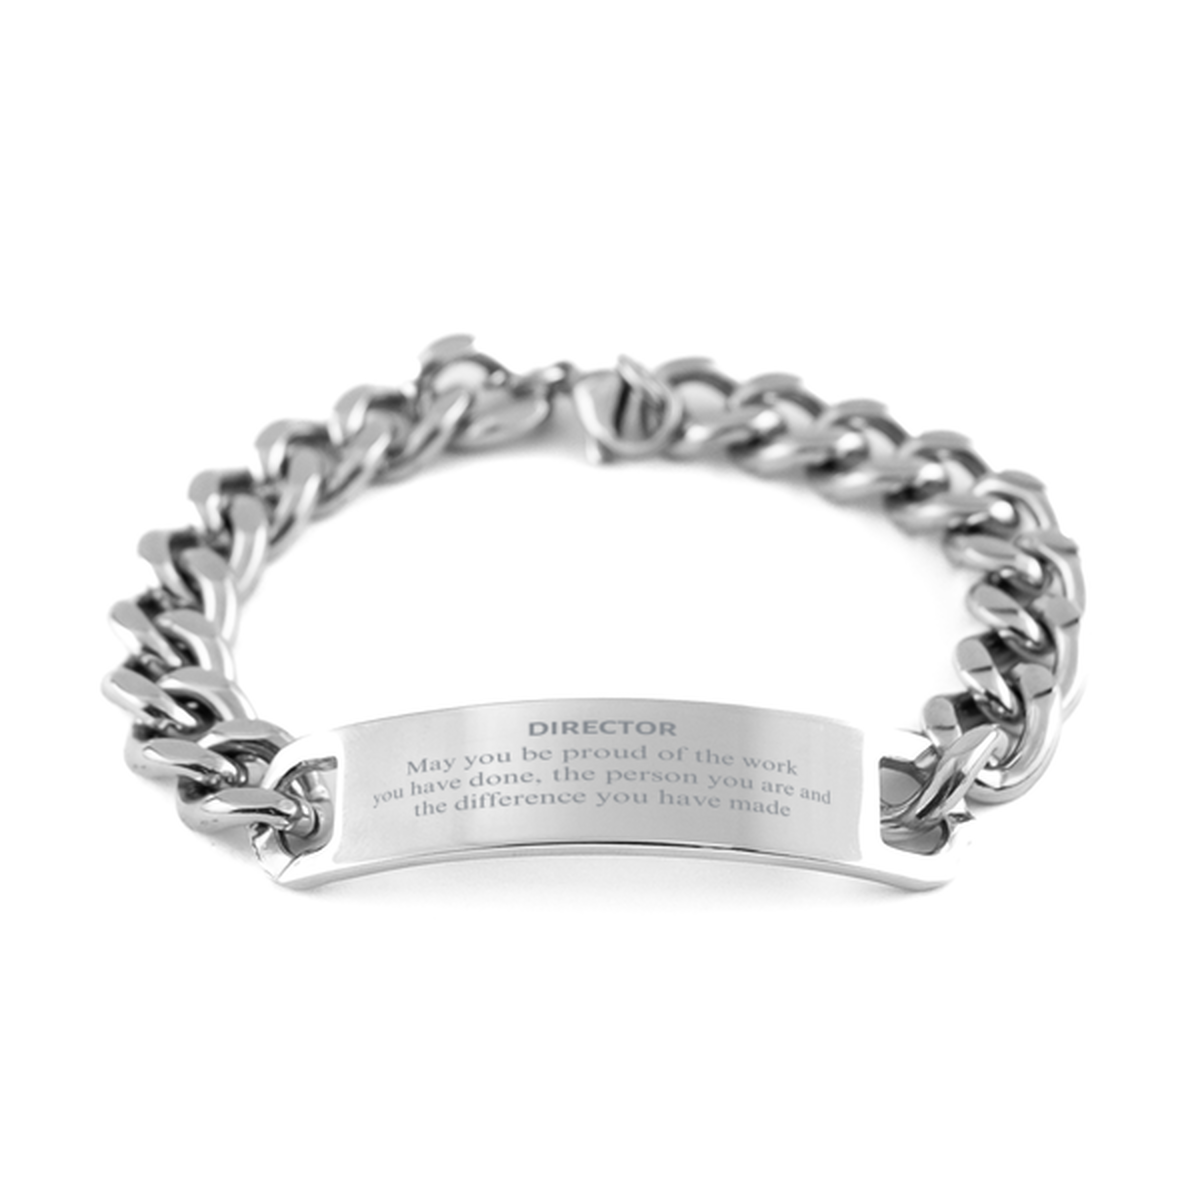 Director May you be proud of the work you have done, Retirement Director Cuban Chain Stainless Steel Bracelet for Colleague Appreciation Gifts Amazing for Director